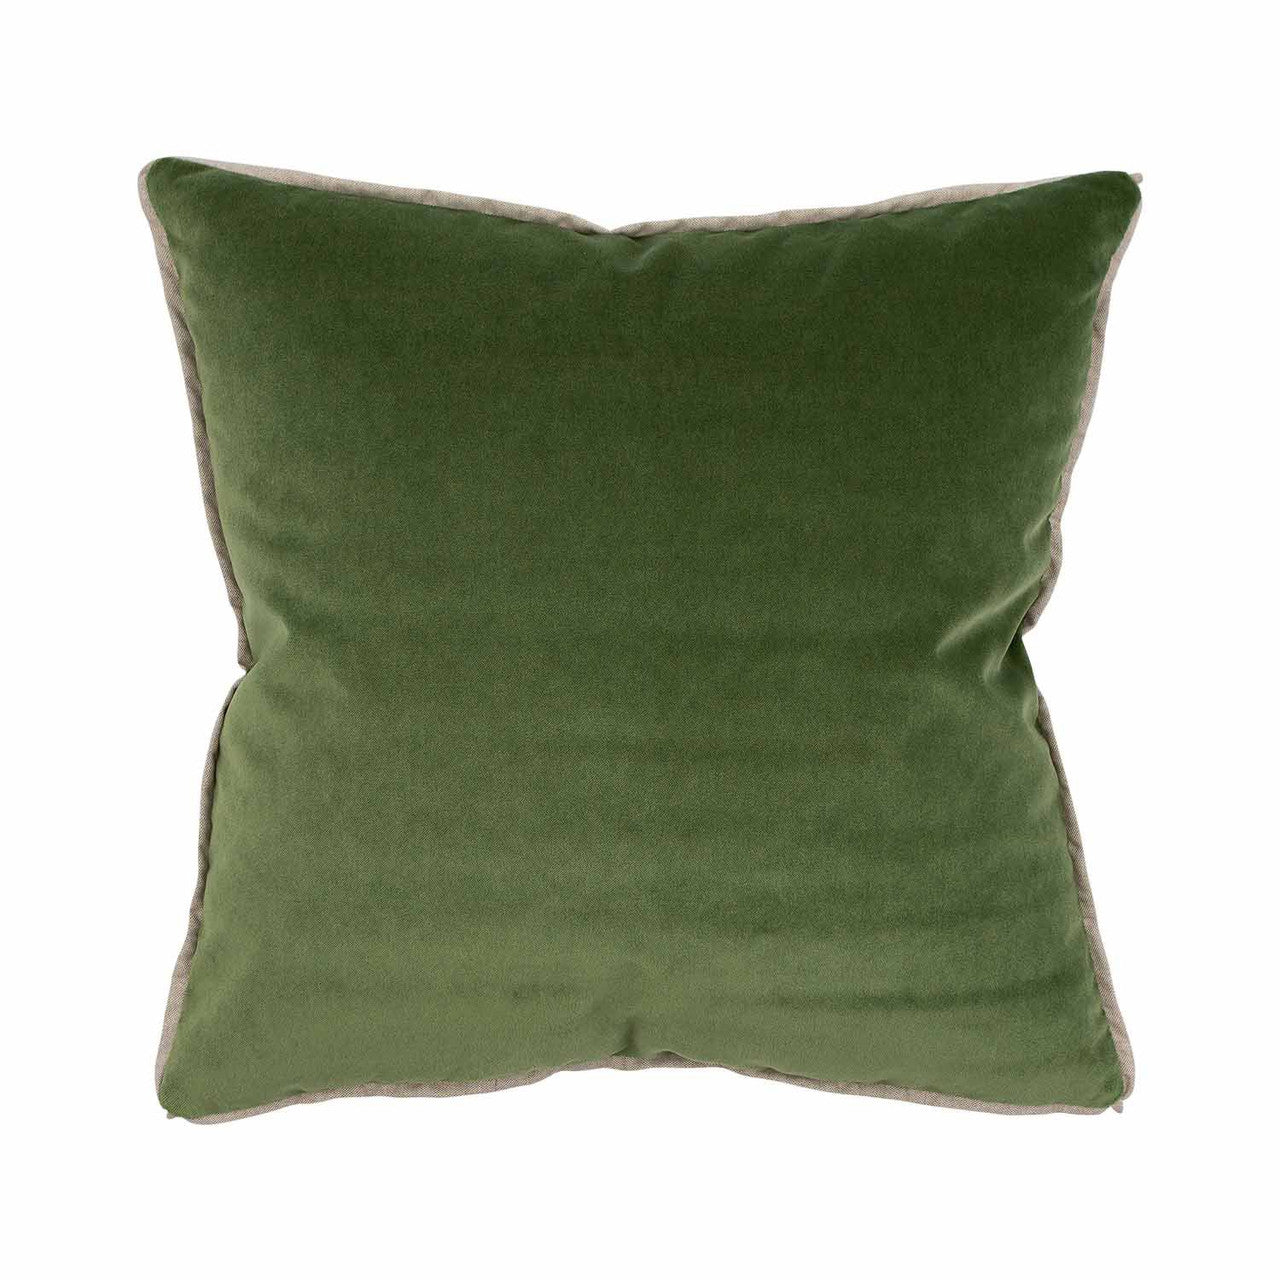 Banks Pillow in Ivy